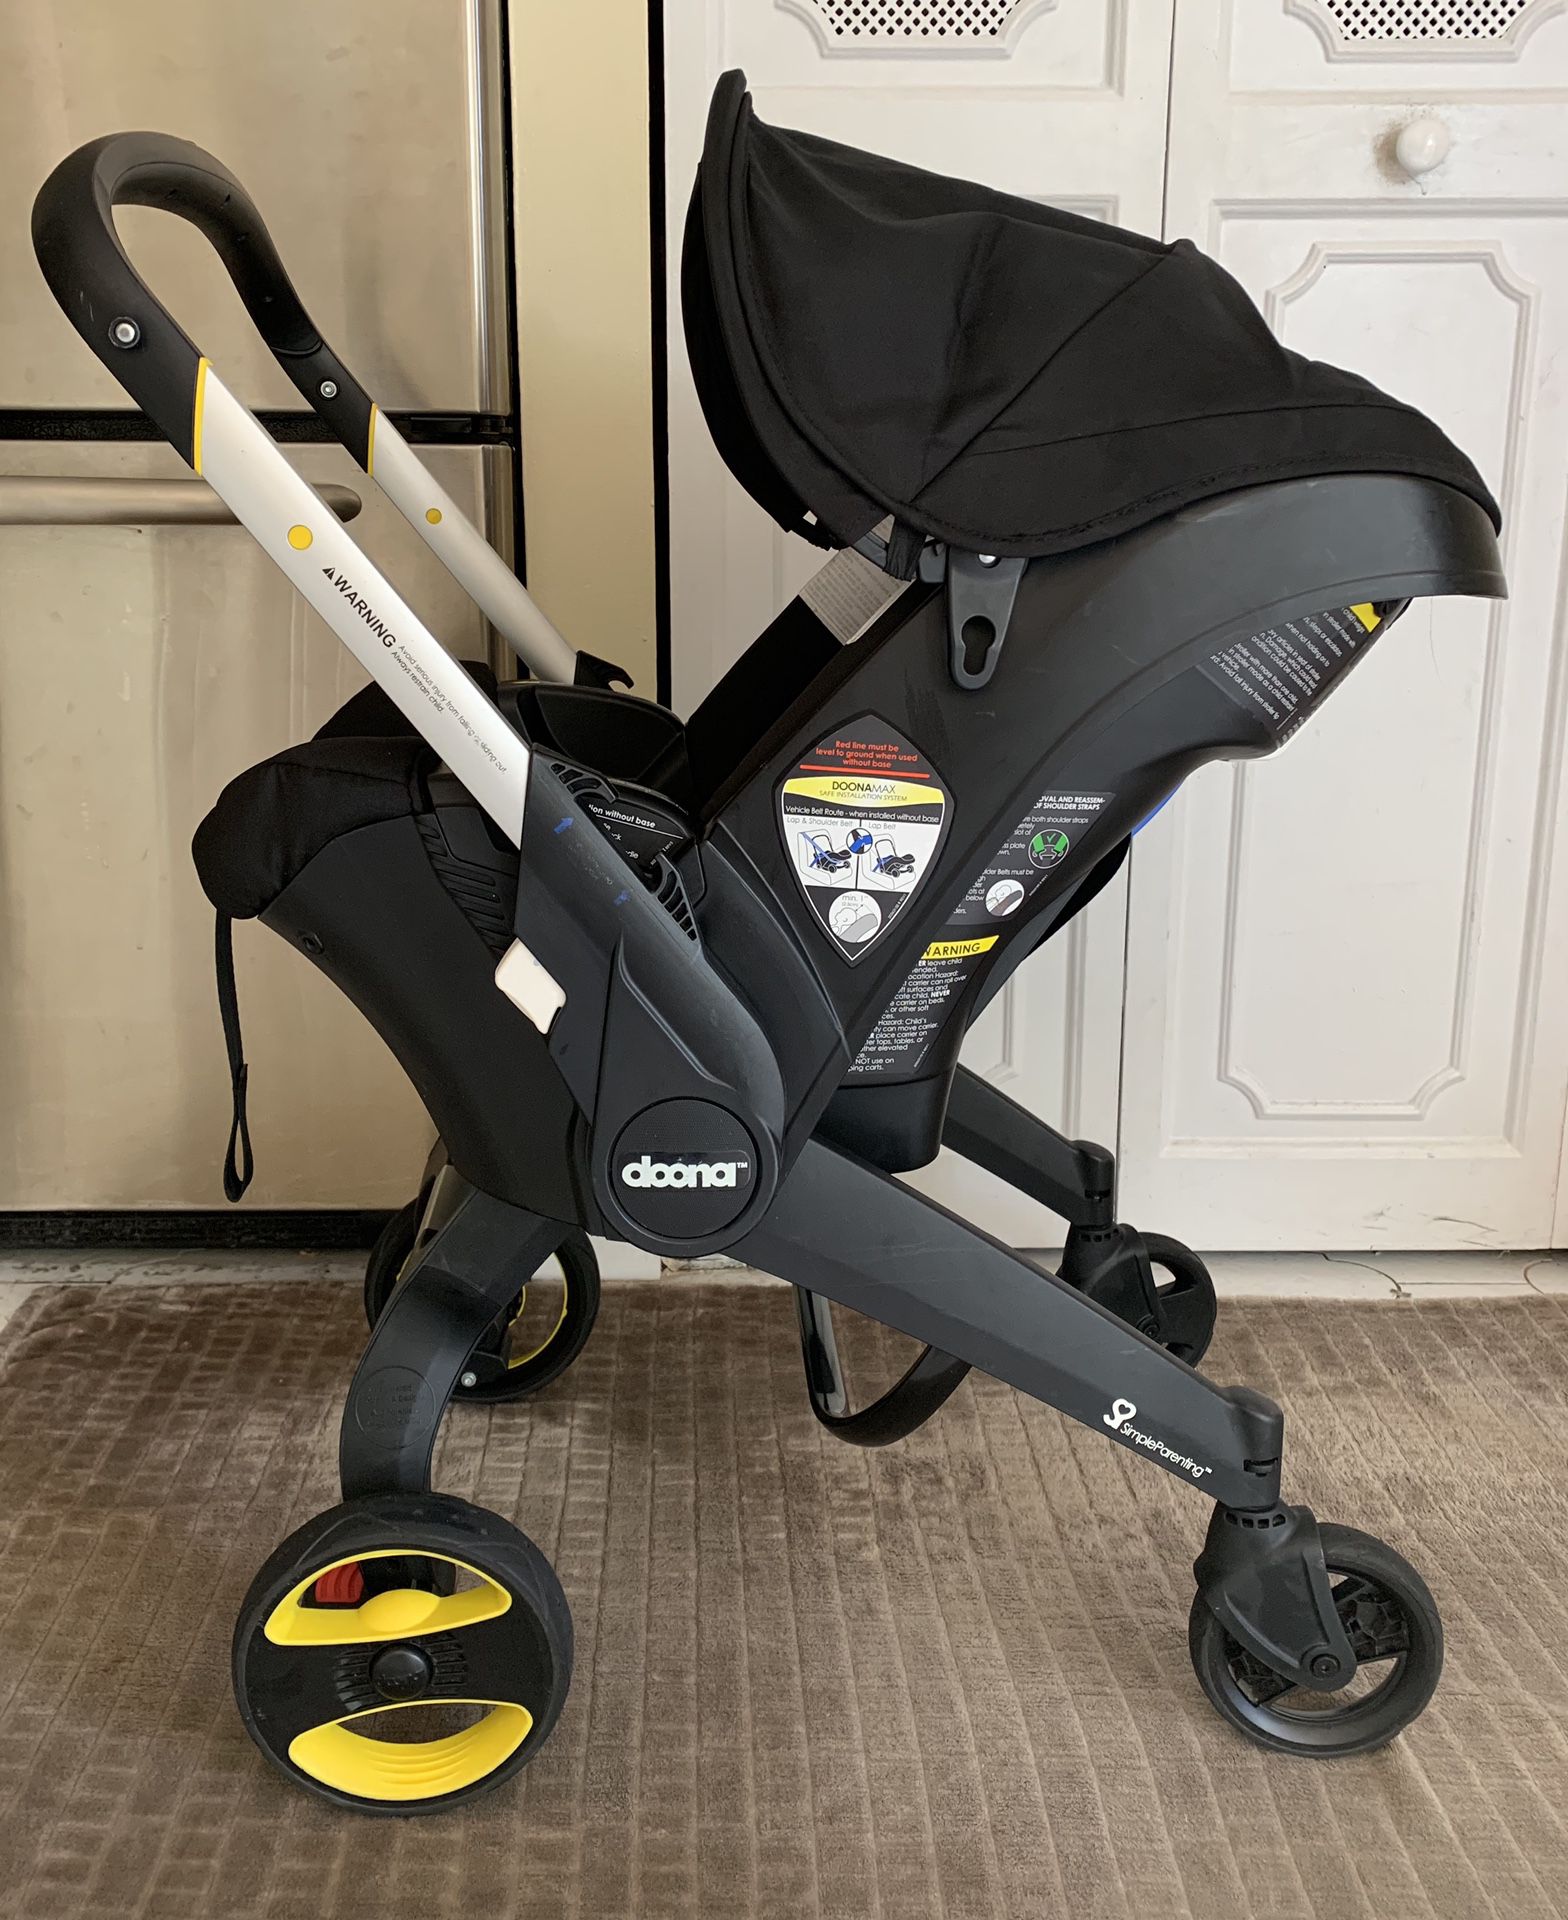 Doona Infant Car Seat with wheels